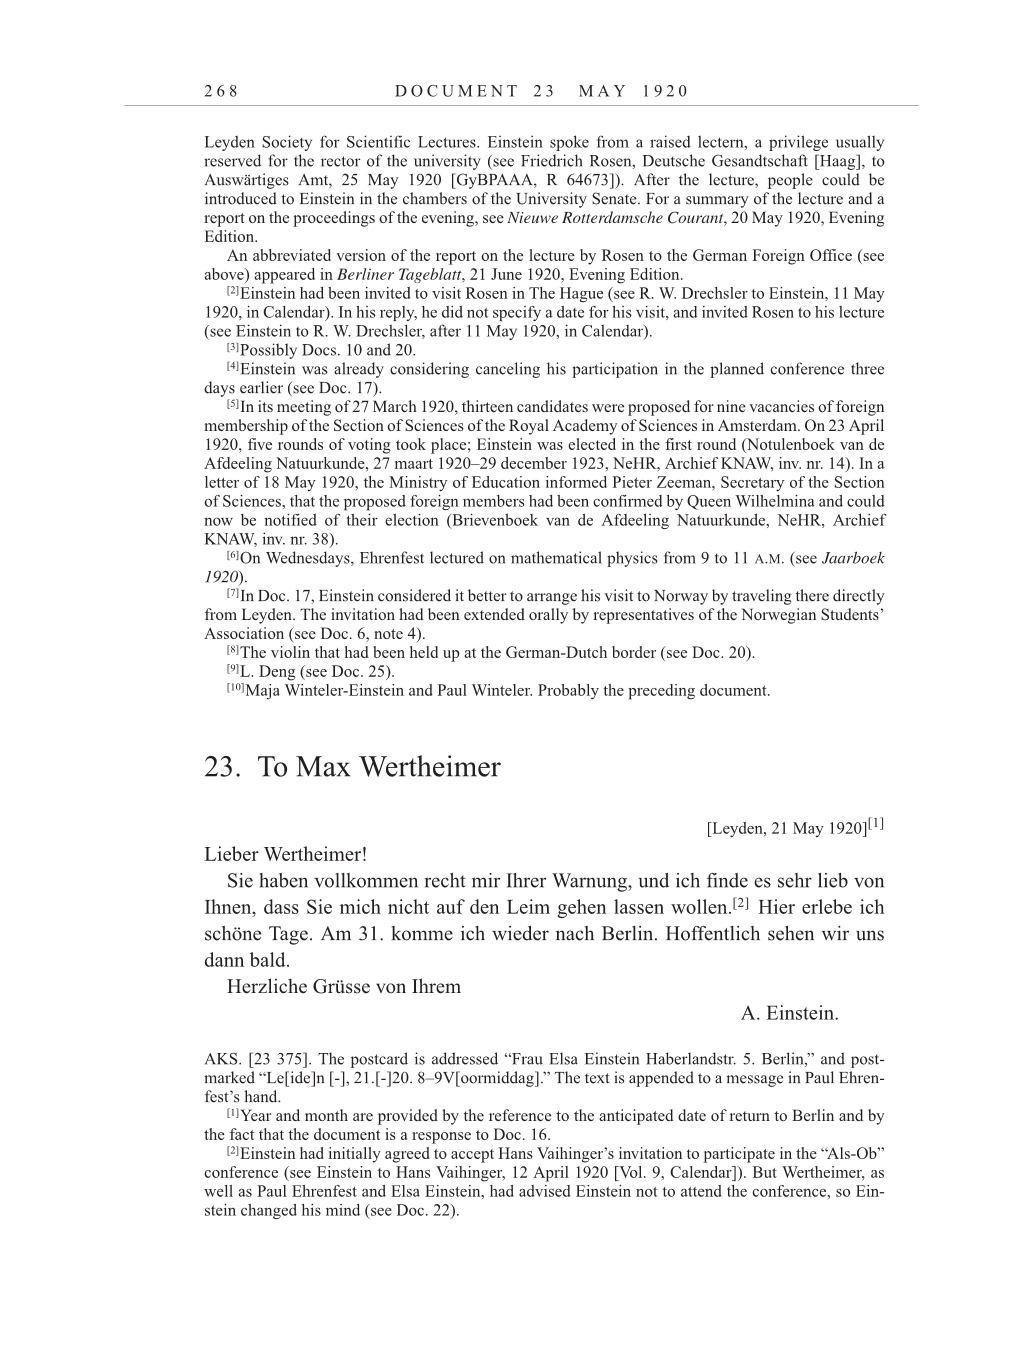 Volume 10: The Berlin Years: Correspondence May-December 1920 / Supplementary Correspondence 1909-1920 page 268